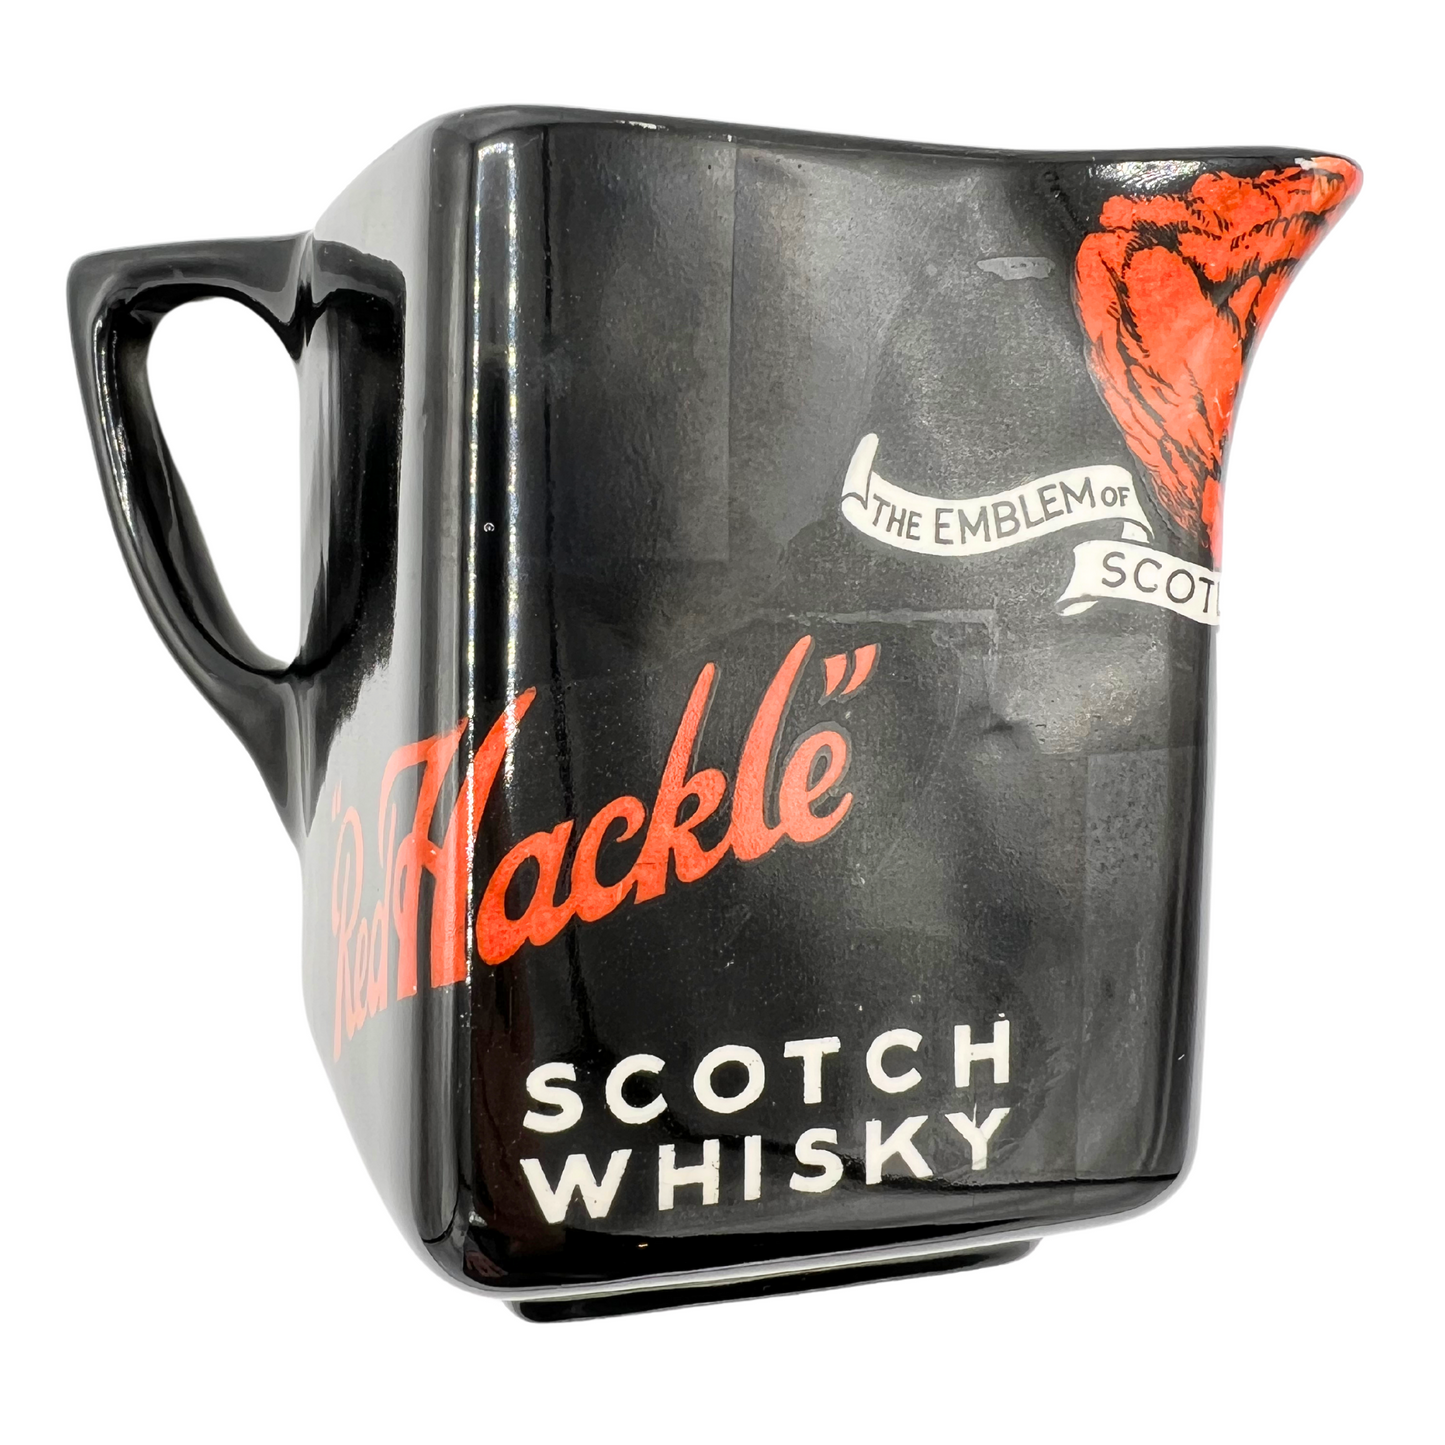 vintage Red Hackle scotch whiskey pitcher